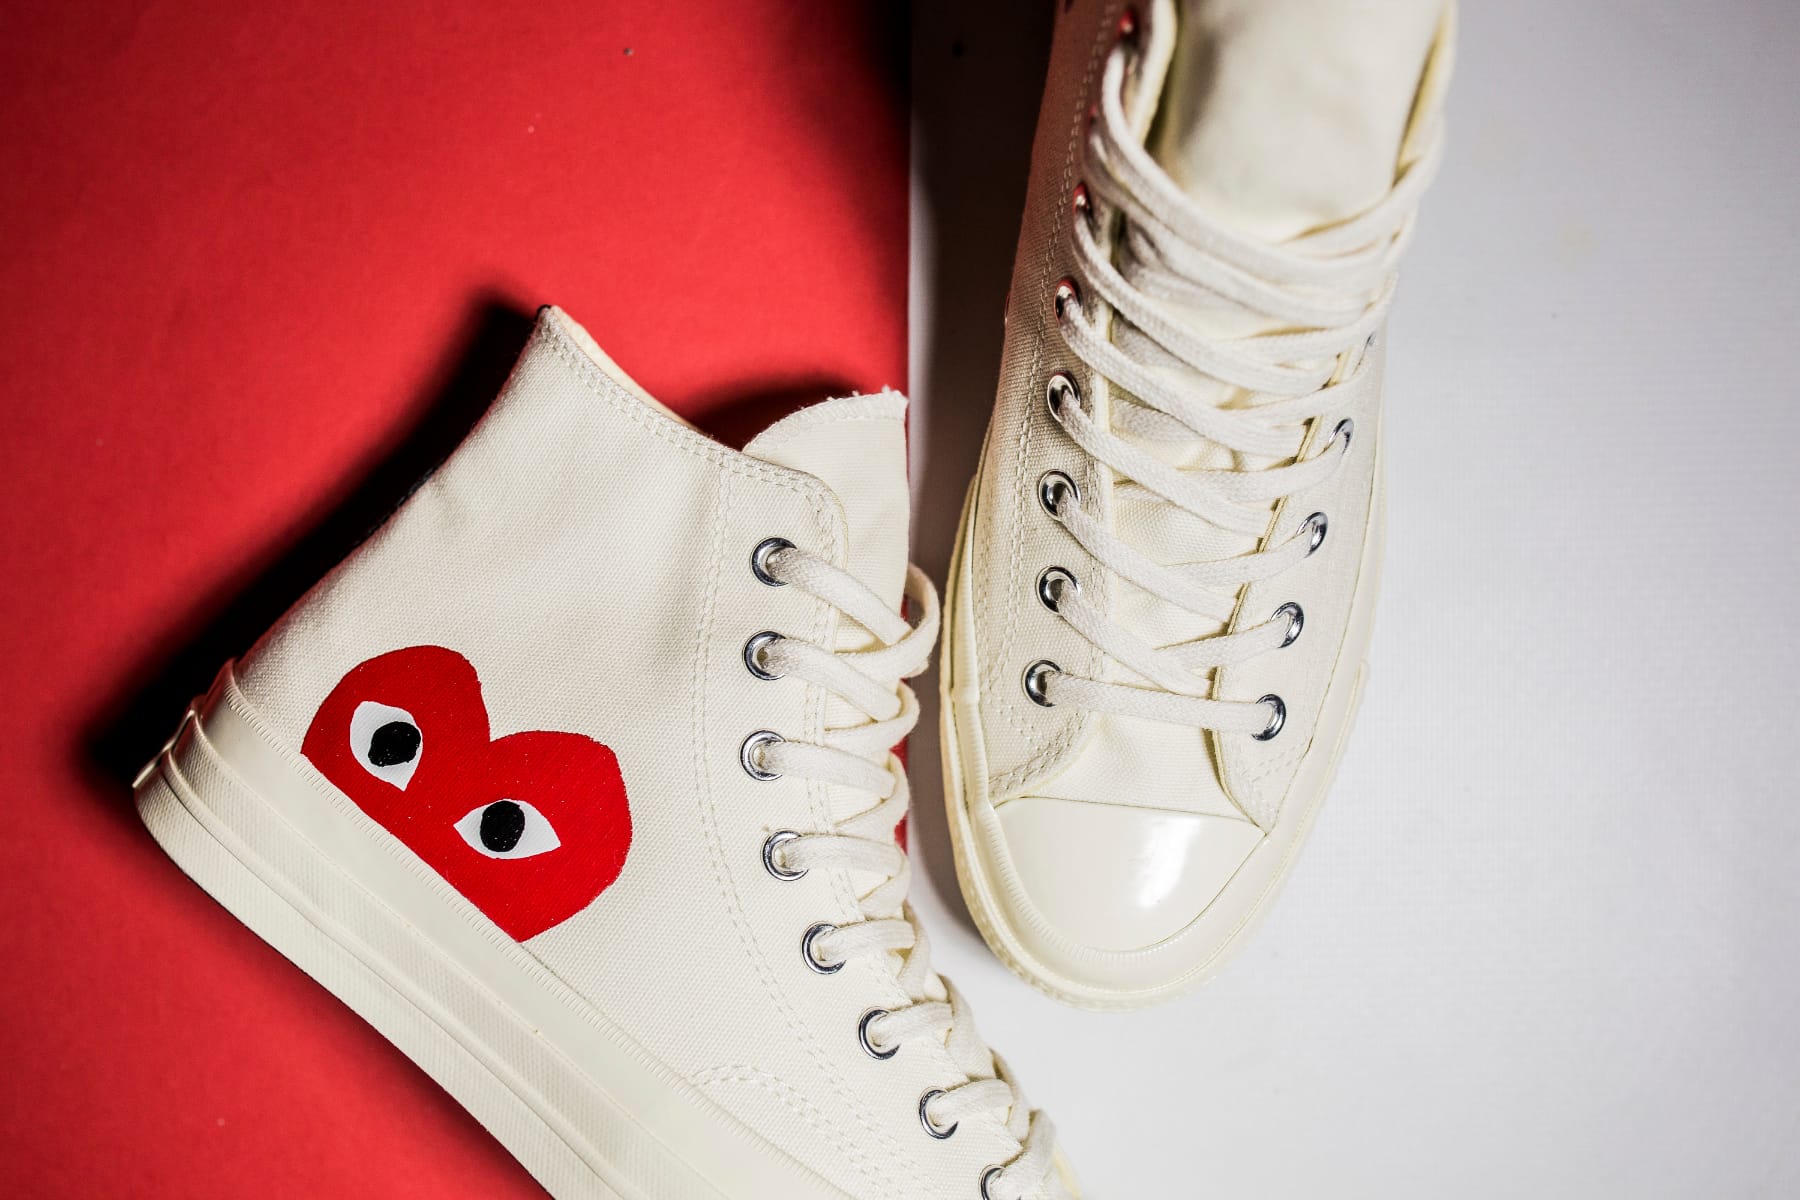 converse shoes red heart